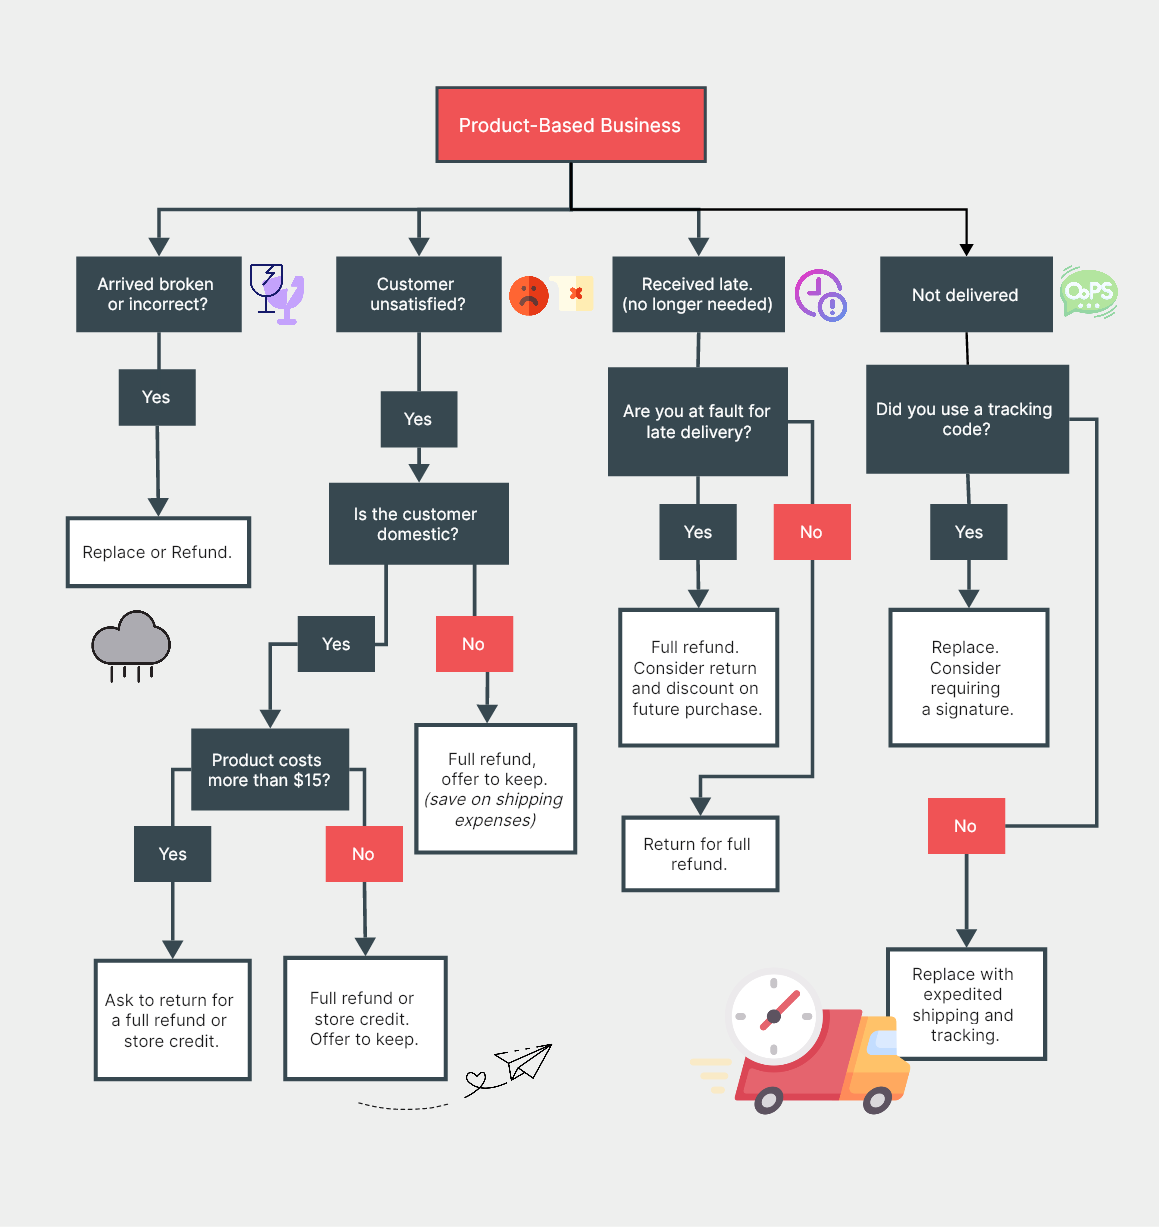 19. Return and Refund Policy Flowchart for Product-Based Business